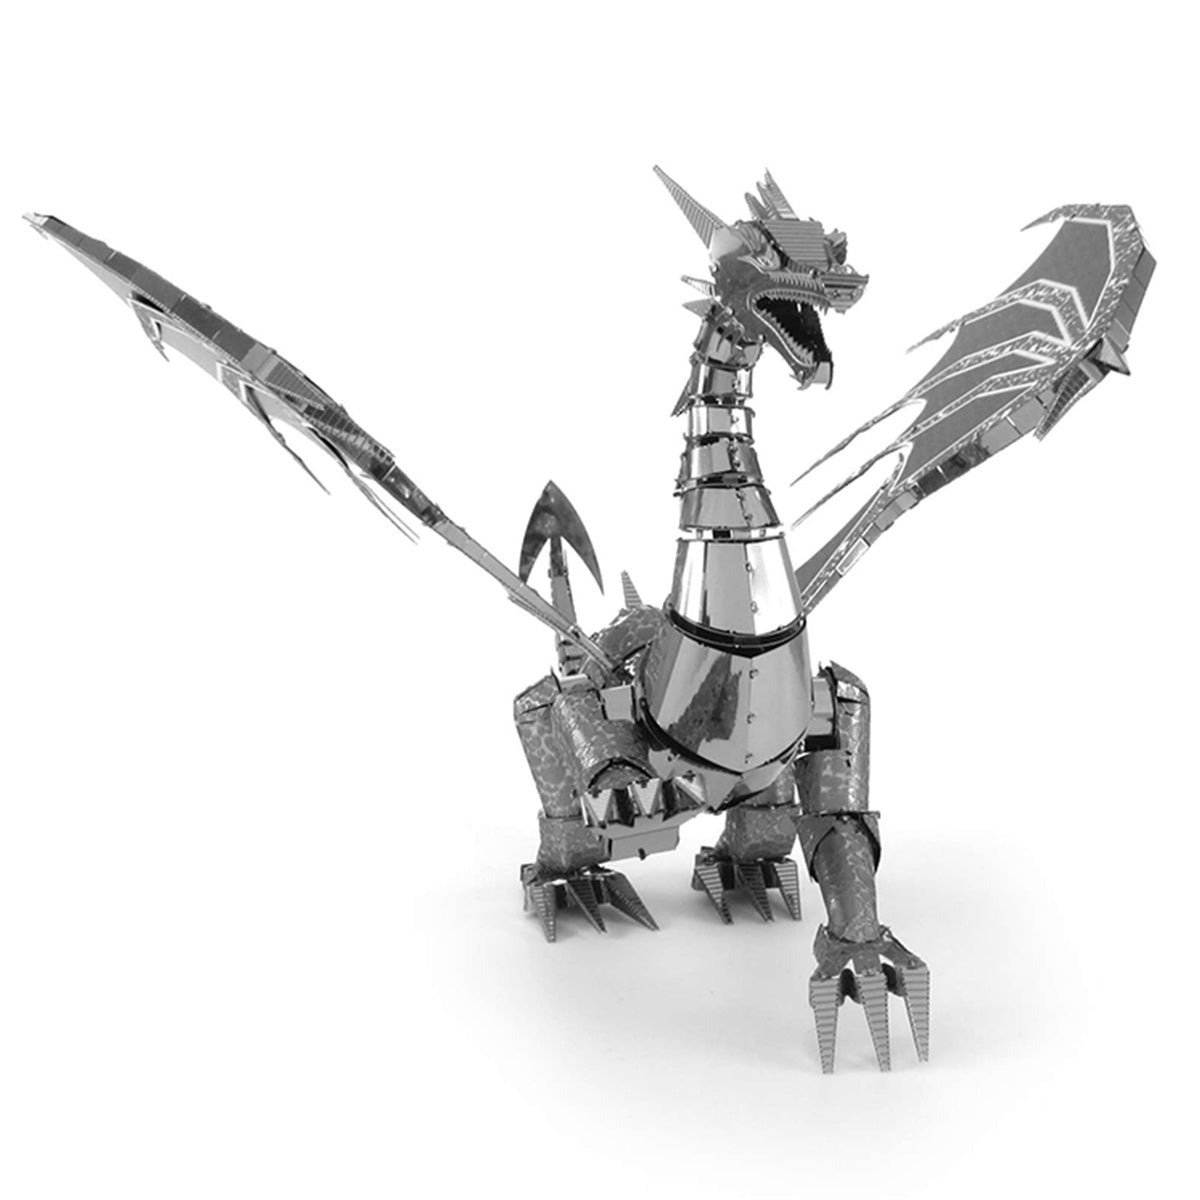 Front view of the Silver Dragon from the steel model kit with one foot off the ground.